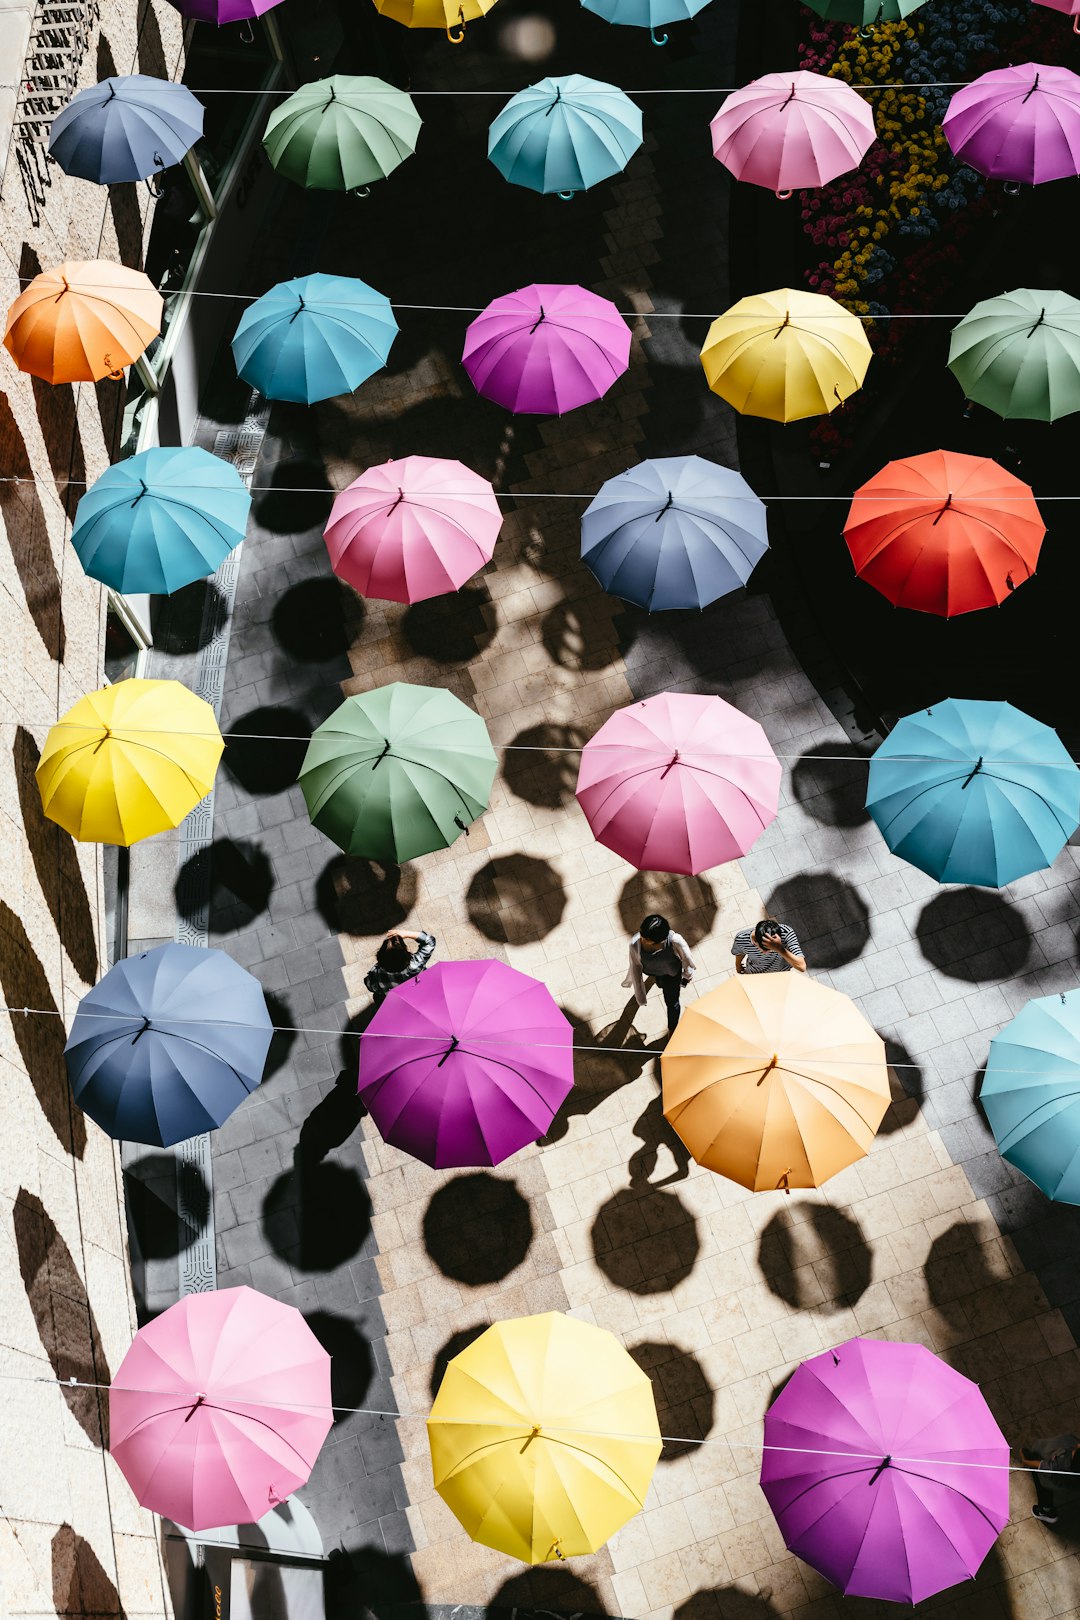 Enhance Your Outdoor Decor with Patterned Umbrellas